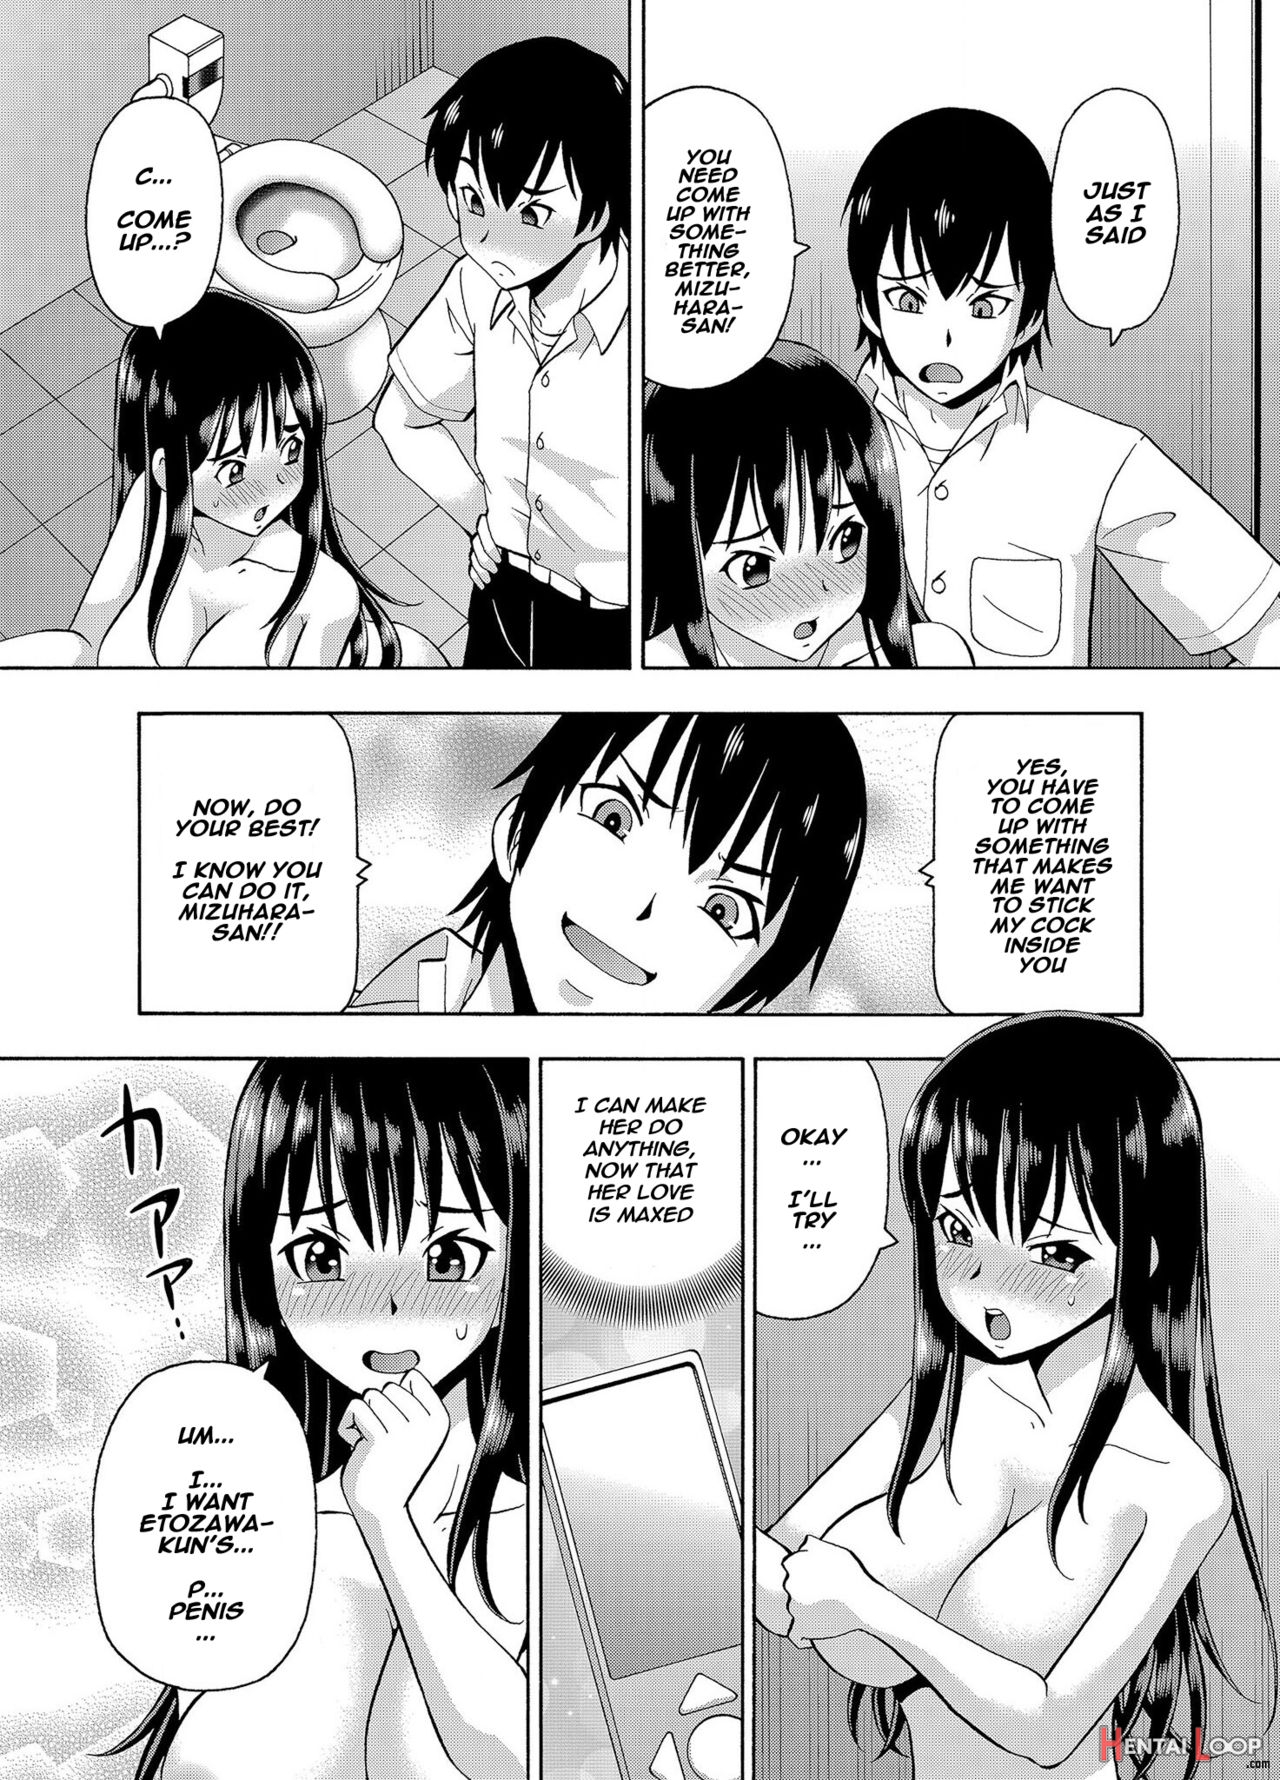 Parameter Remote Control – That Makes It Easy To Have Sex With Girls! – Ch. 3 page 7